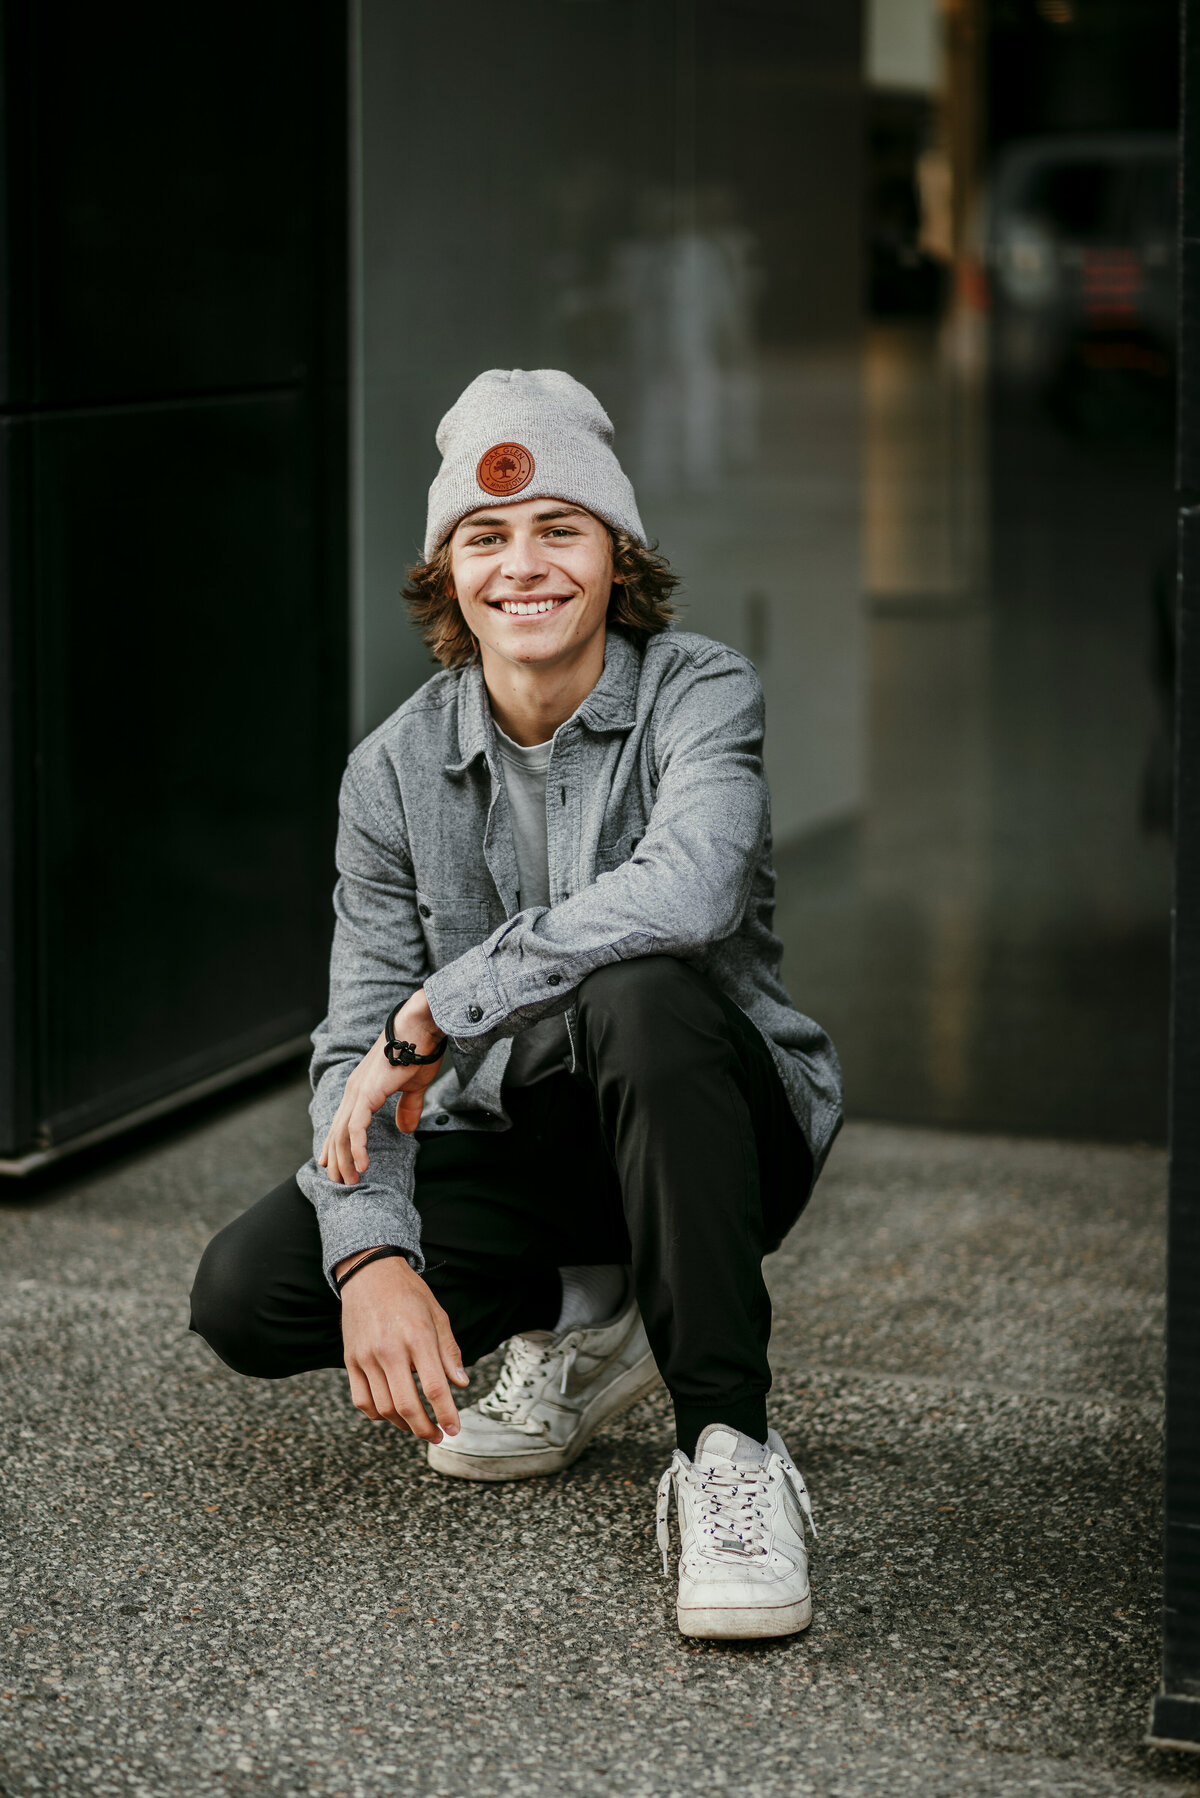 Discover your urban style with senior portraits in downtown Minneapolis. Shannon Kathleen Photography brings out your personality in every shot. Book your session now